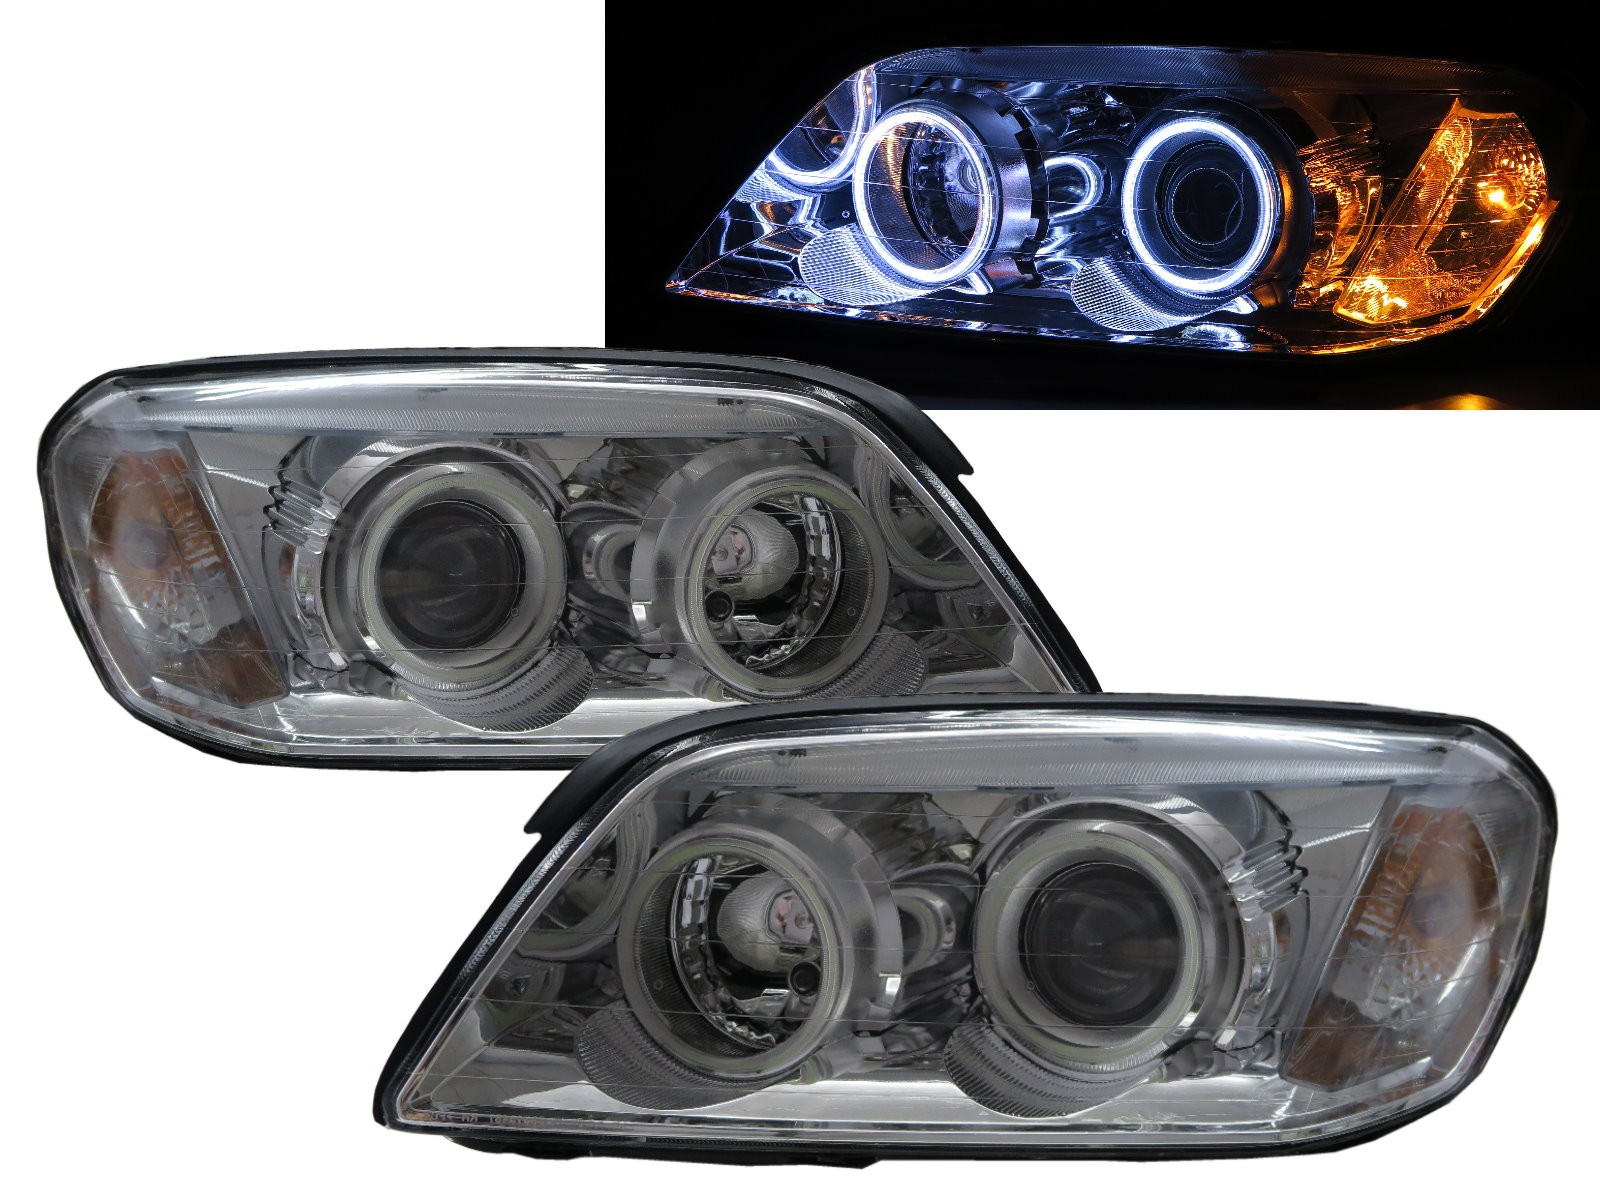 CrazyTheGod Captiva First generation 2006-2010 PRE-FACELIFT Wagon 5D COB Projector Headlight Headlamp Chrome for CHEVROLET CHEVY LHD